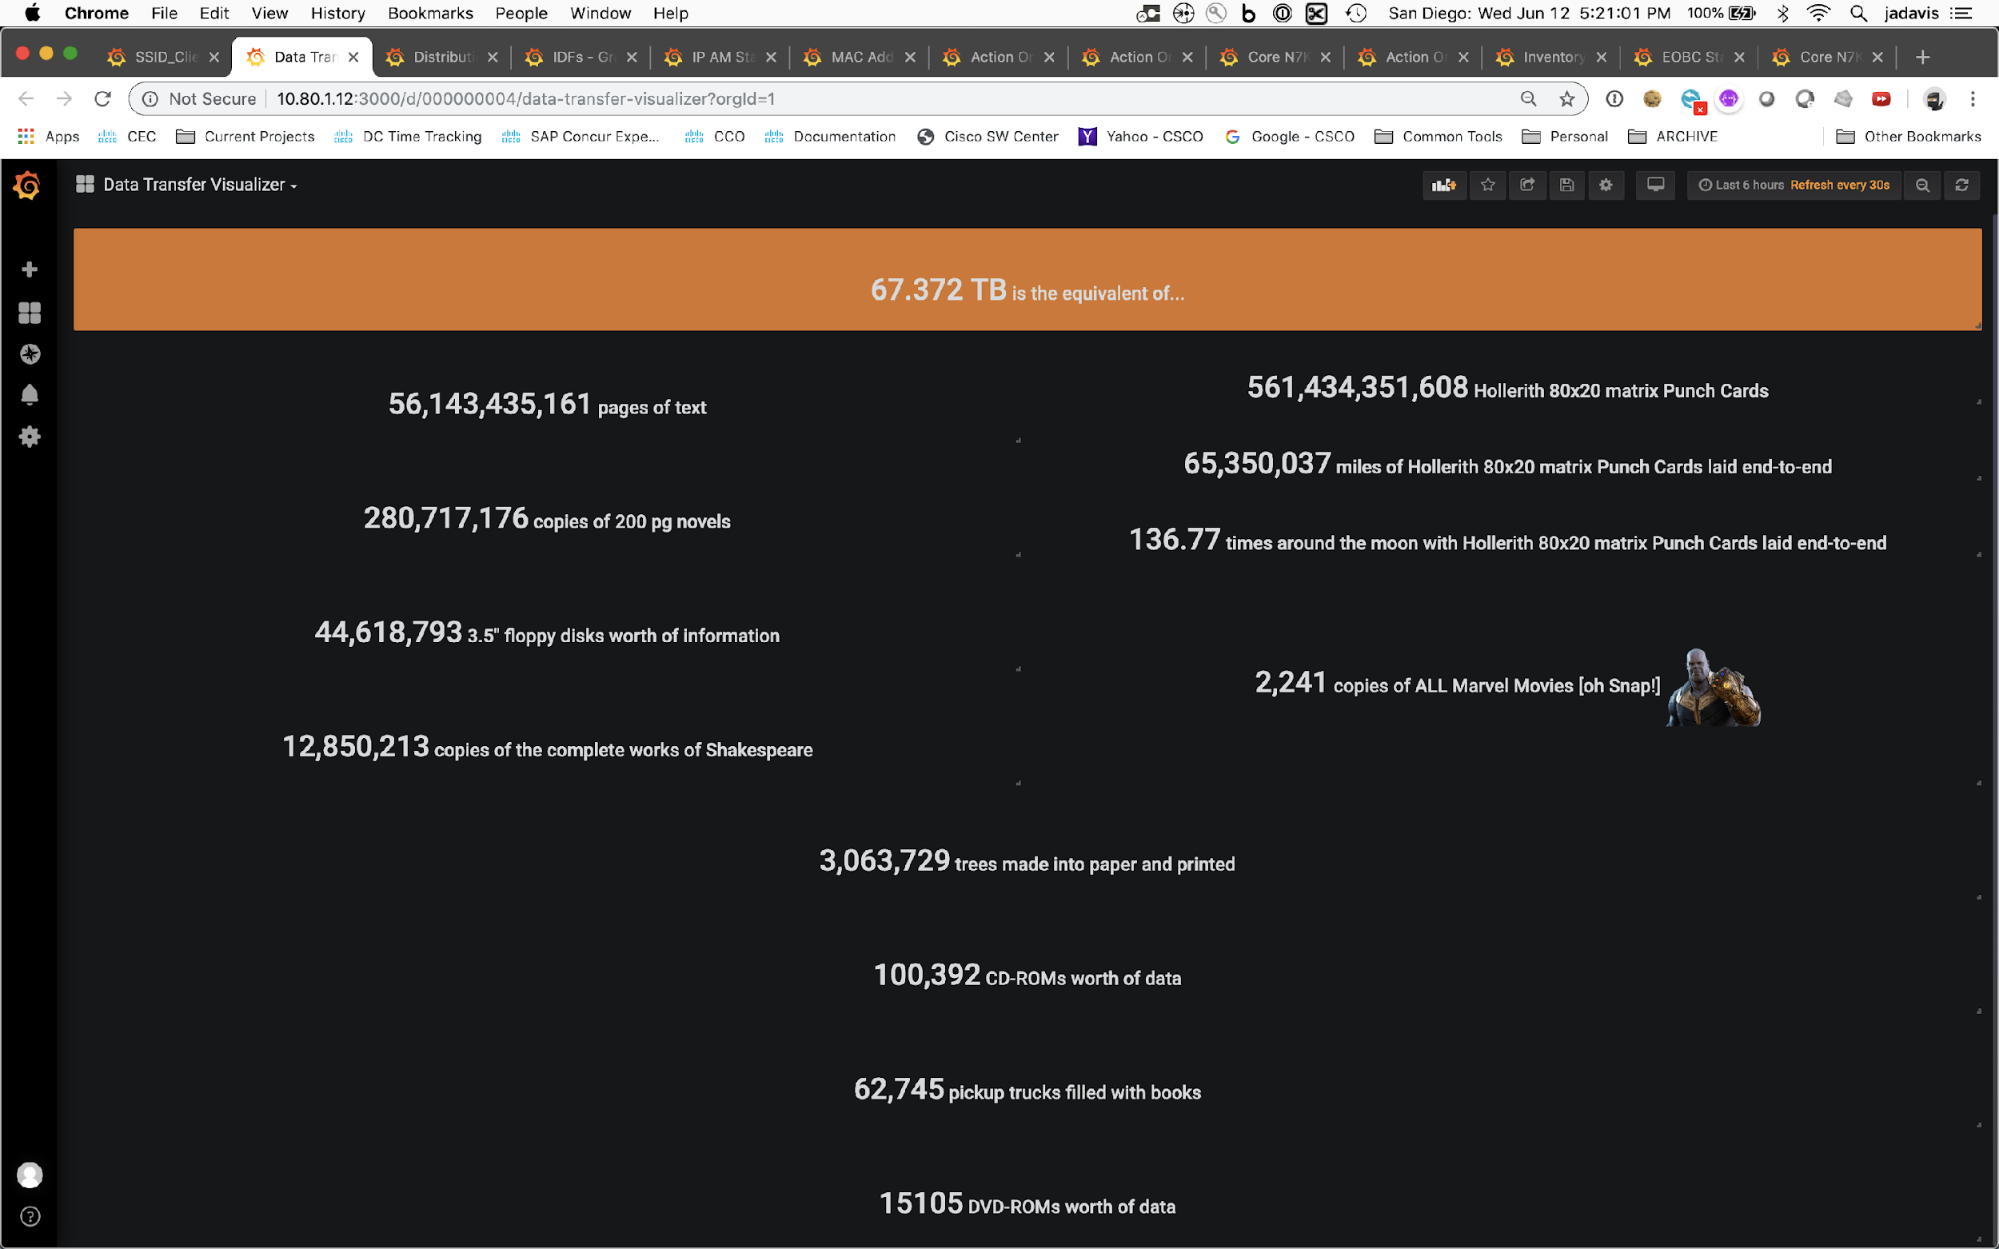 A Grafana dashboard from Cisco Live 2019 converted the amount of Internet traffic moved over the course of the event into accessible metrics for a non-technical audience.